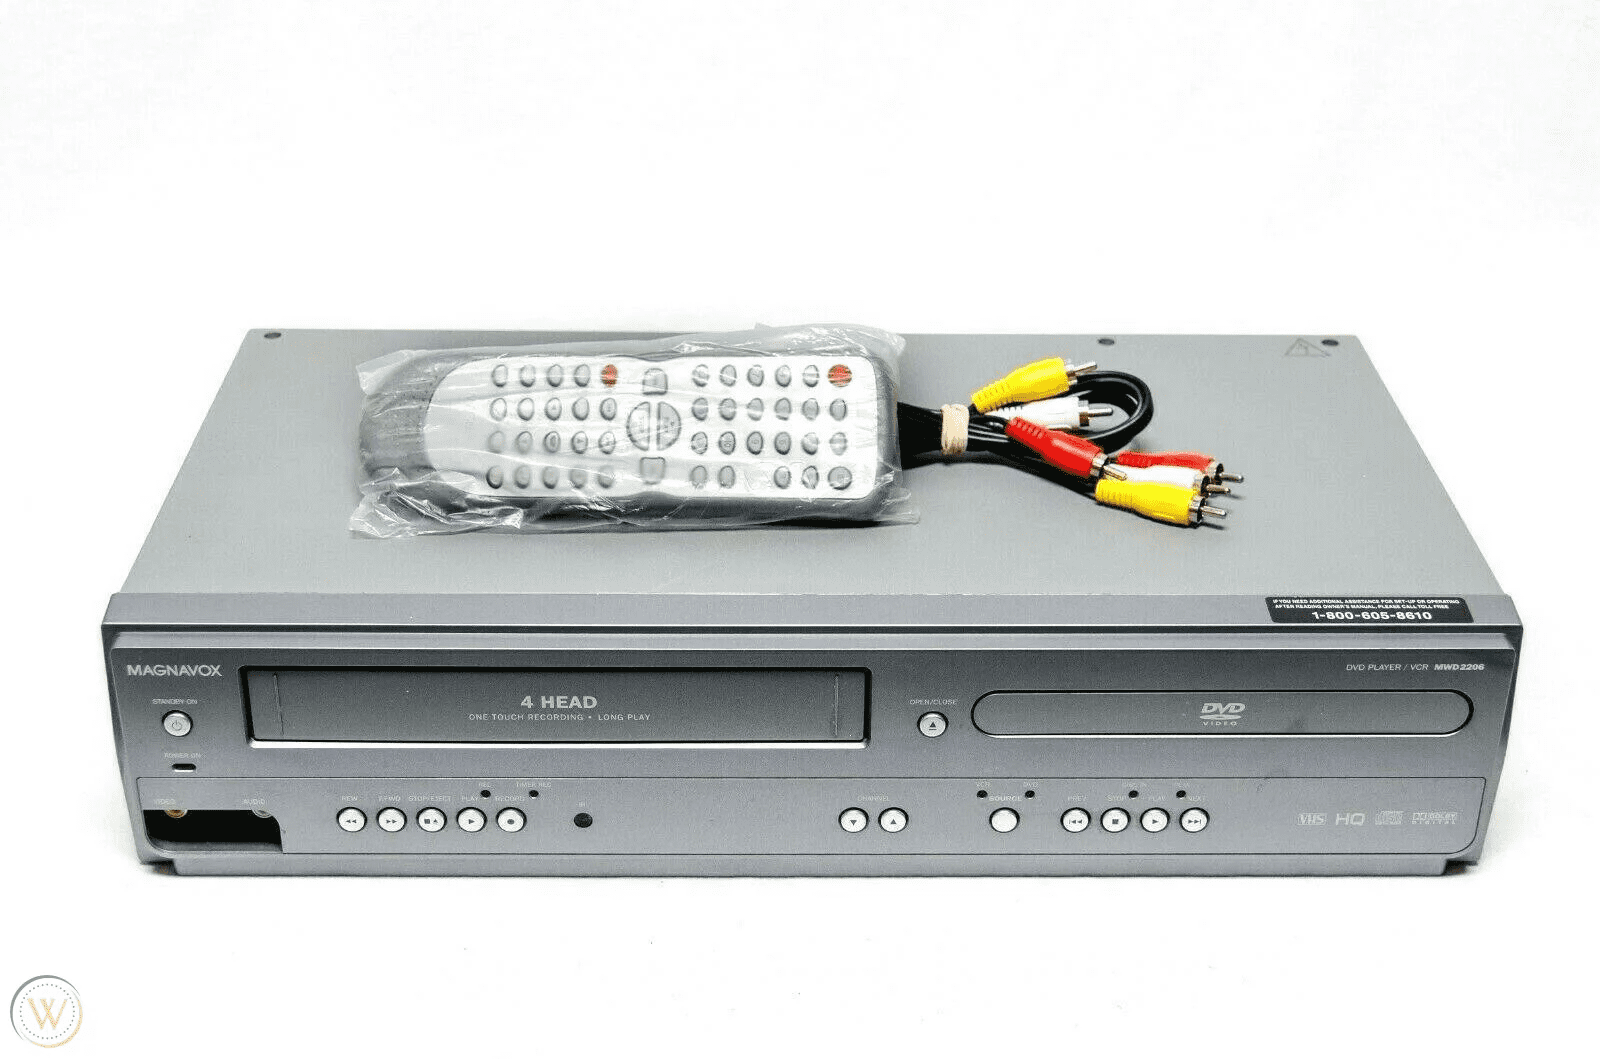 Vhs To Dvd Recordervhs To Digital Converter - Usb 2.0 Video Capture Card  For Win7/8/10